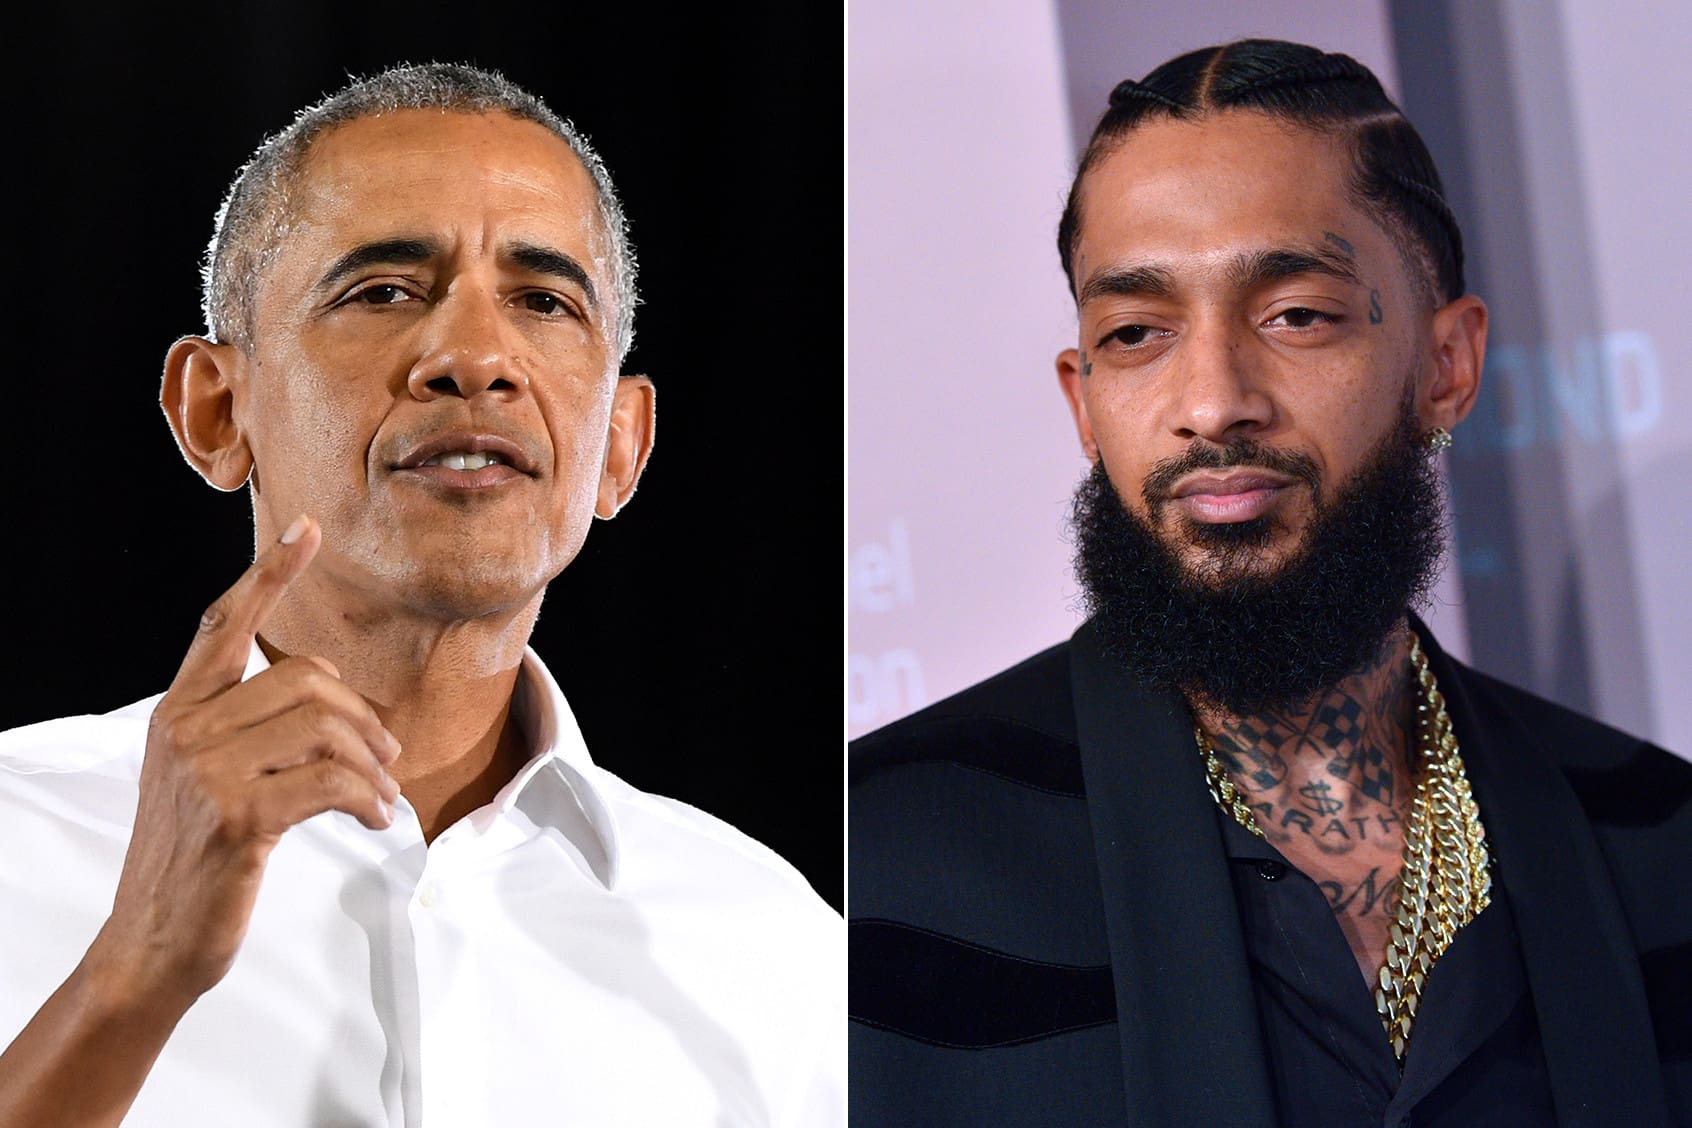 Barack Obama Praises Nipsey Hussle In A Letter - Read It Here And Watch The Video